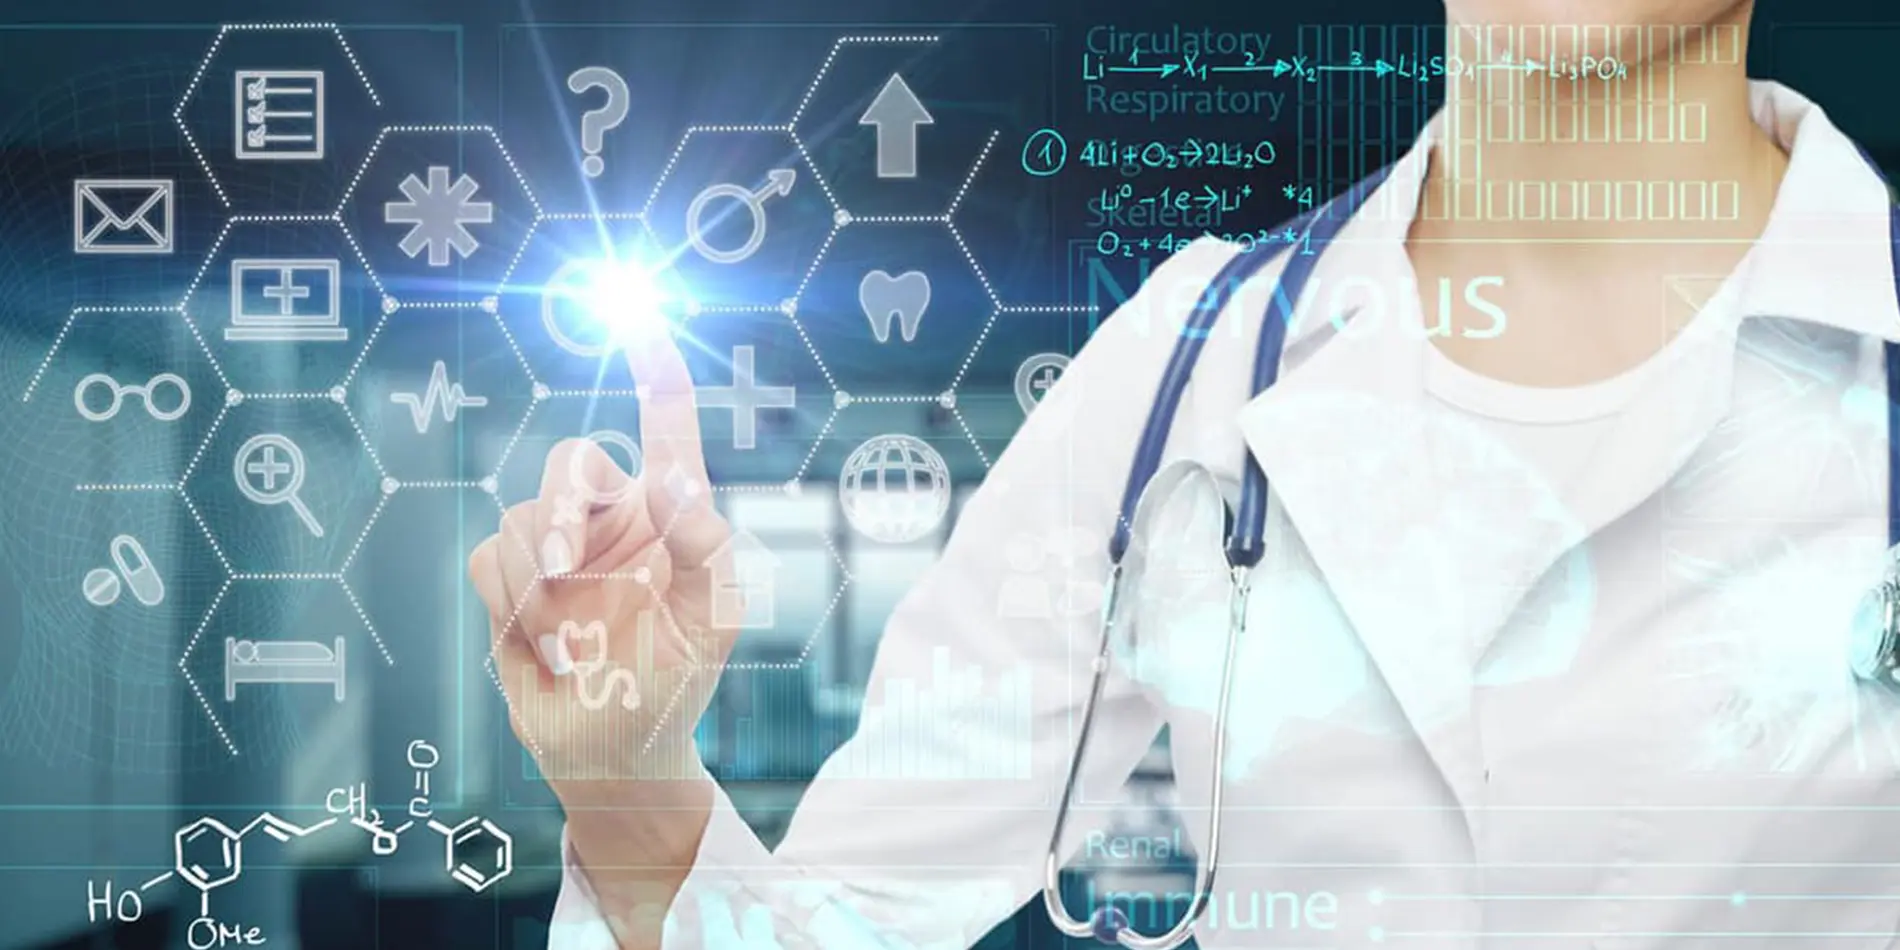 A person with a white lab coat and a stethoscope around their neck is pointing at general data icons in a hologram.